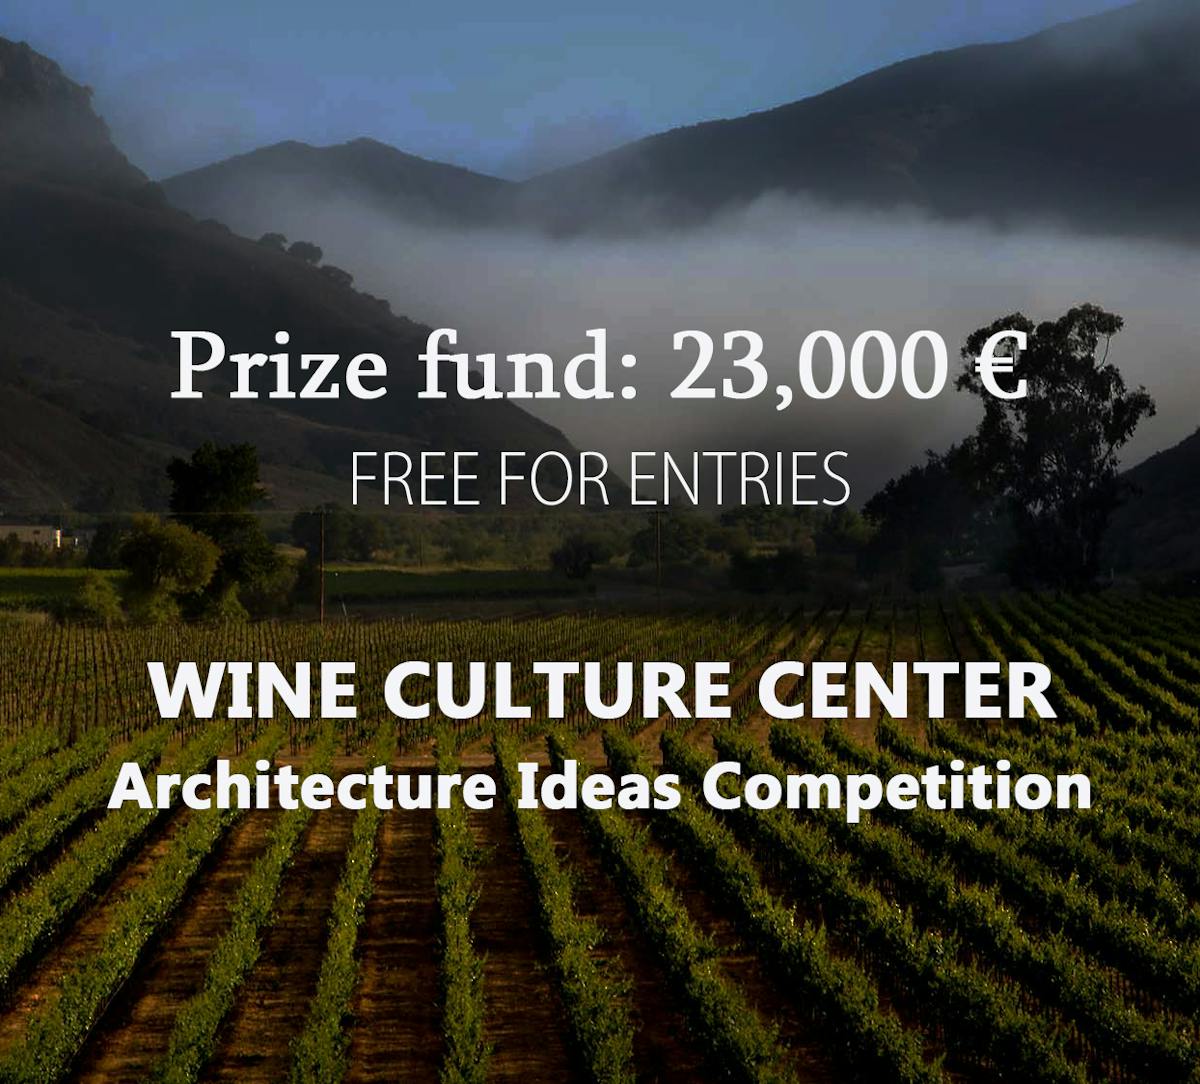 Call for entries: Wine Culture Center